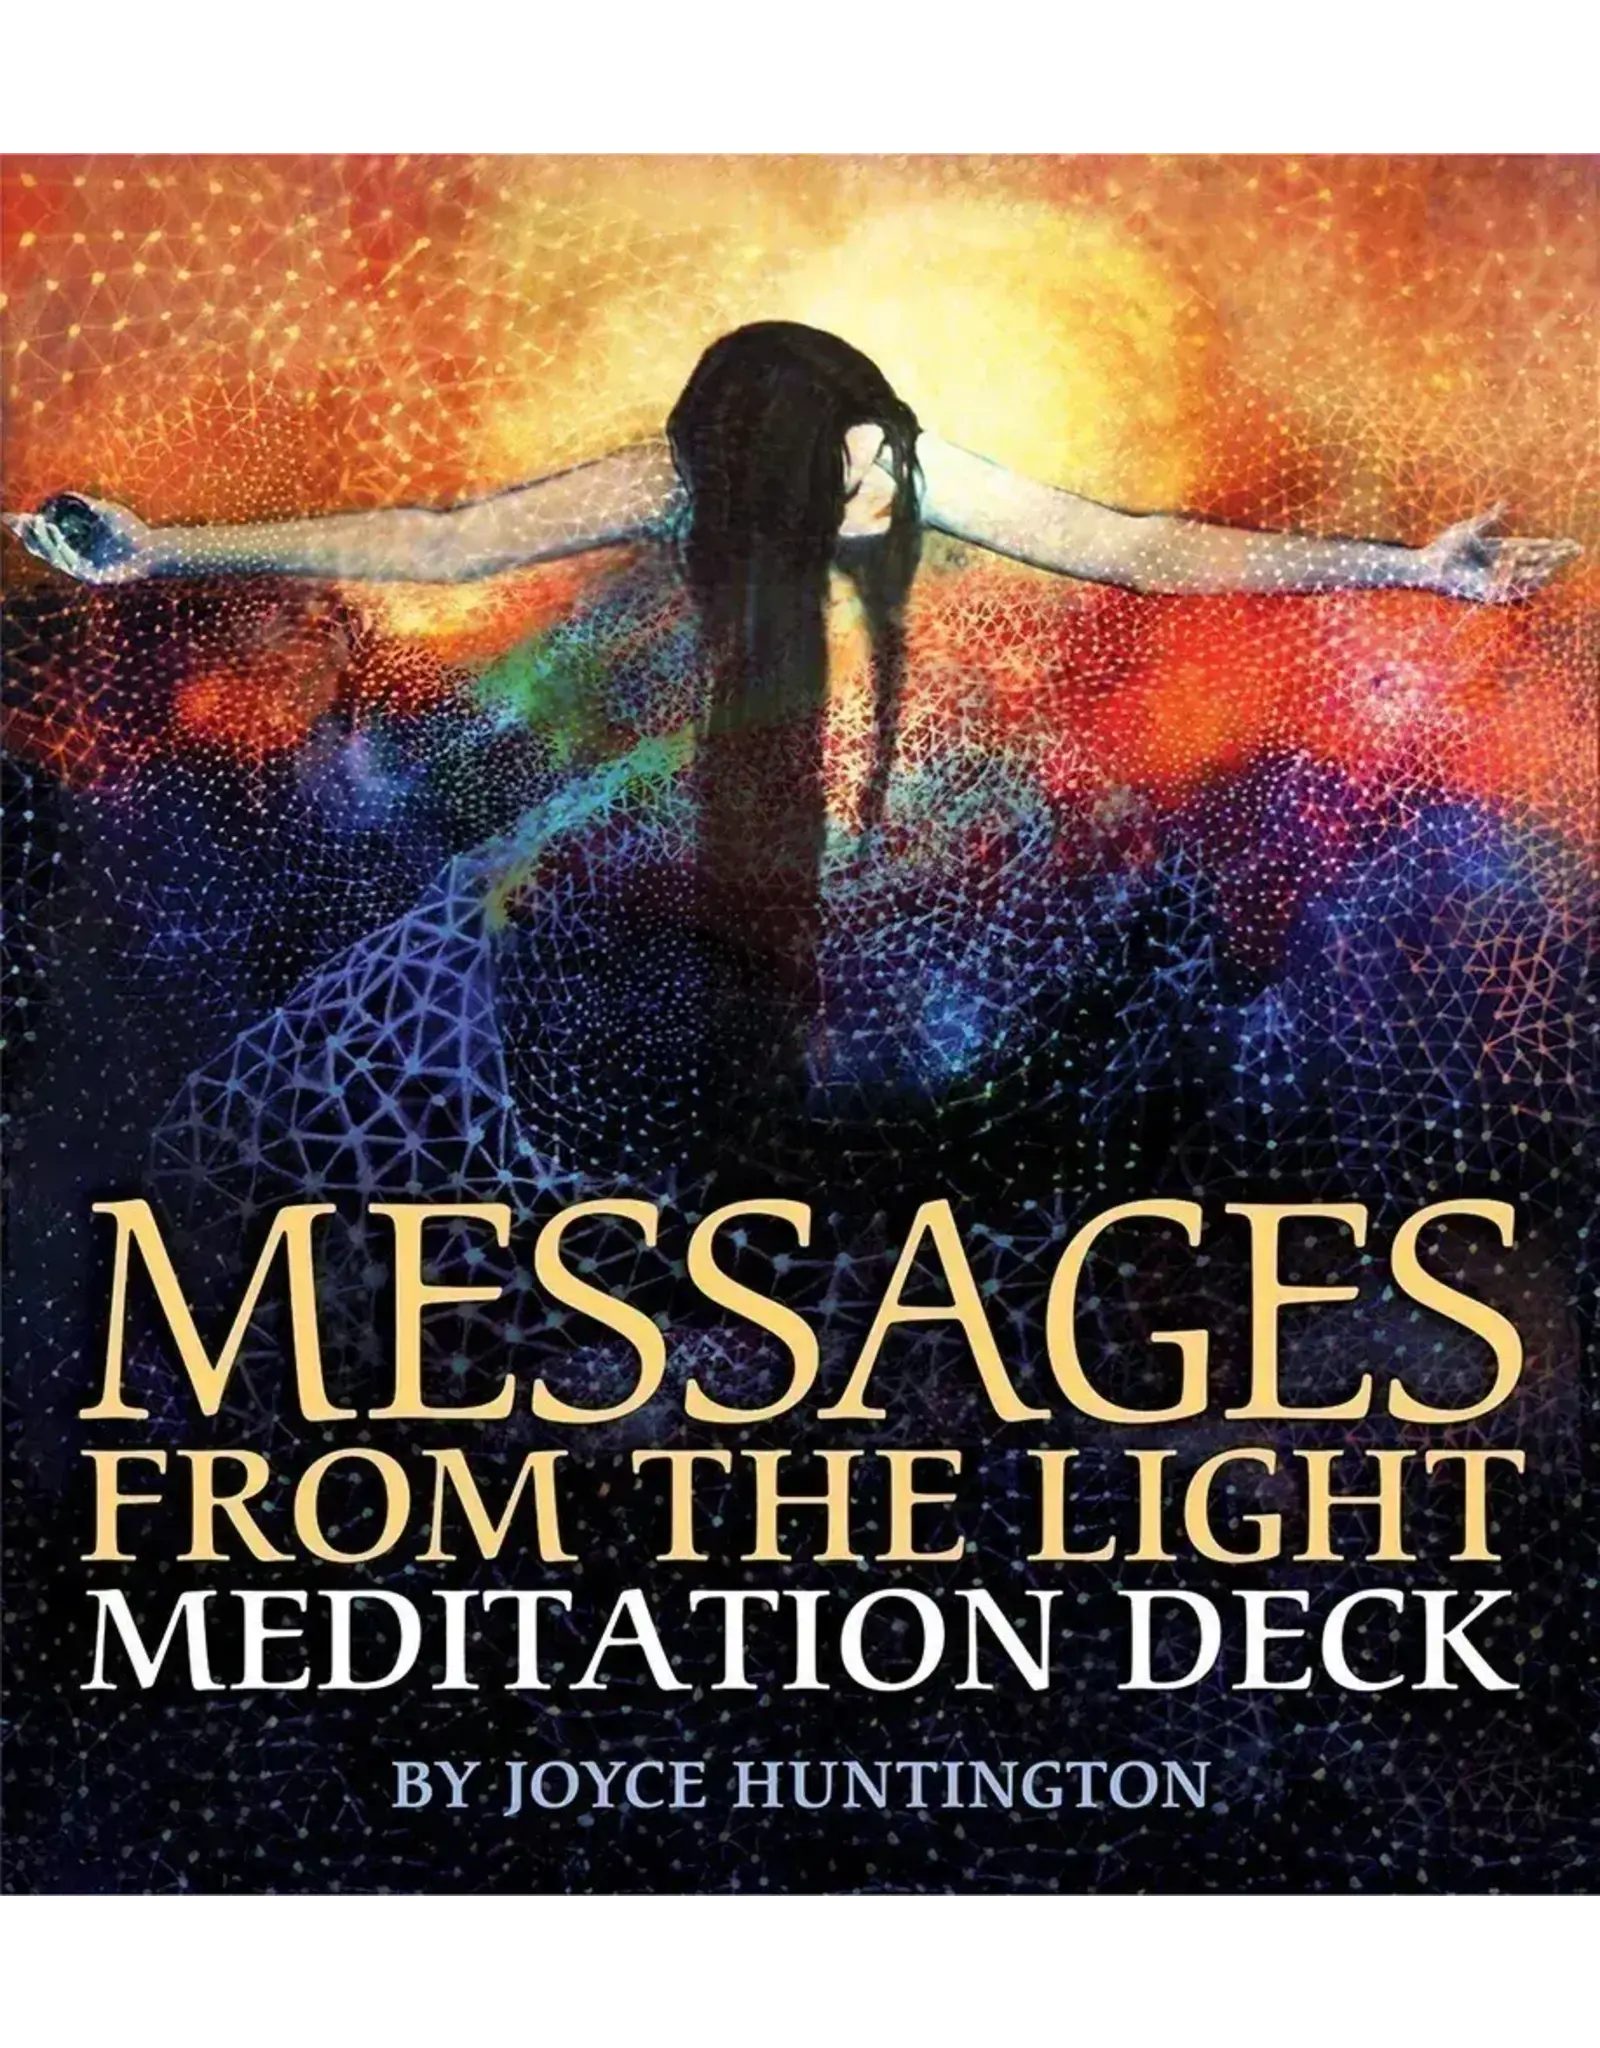 US Games Messages from the Light Meditation Deck